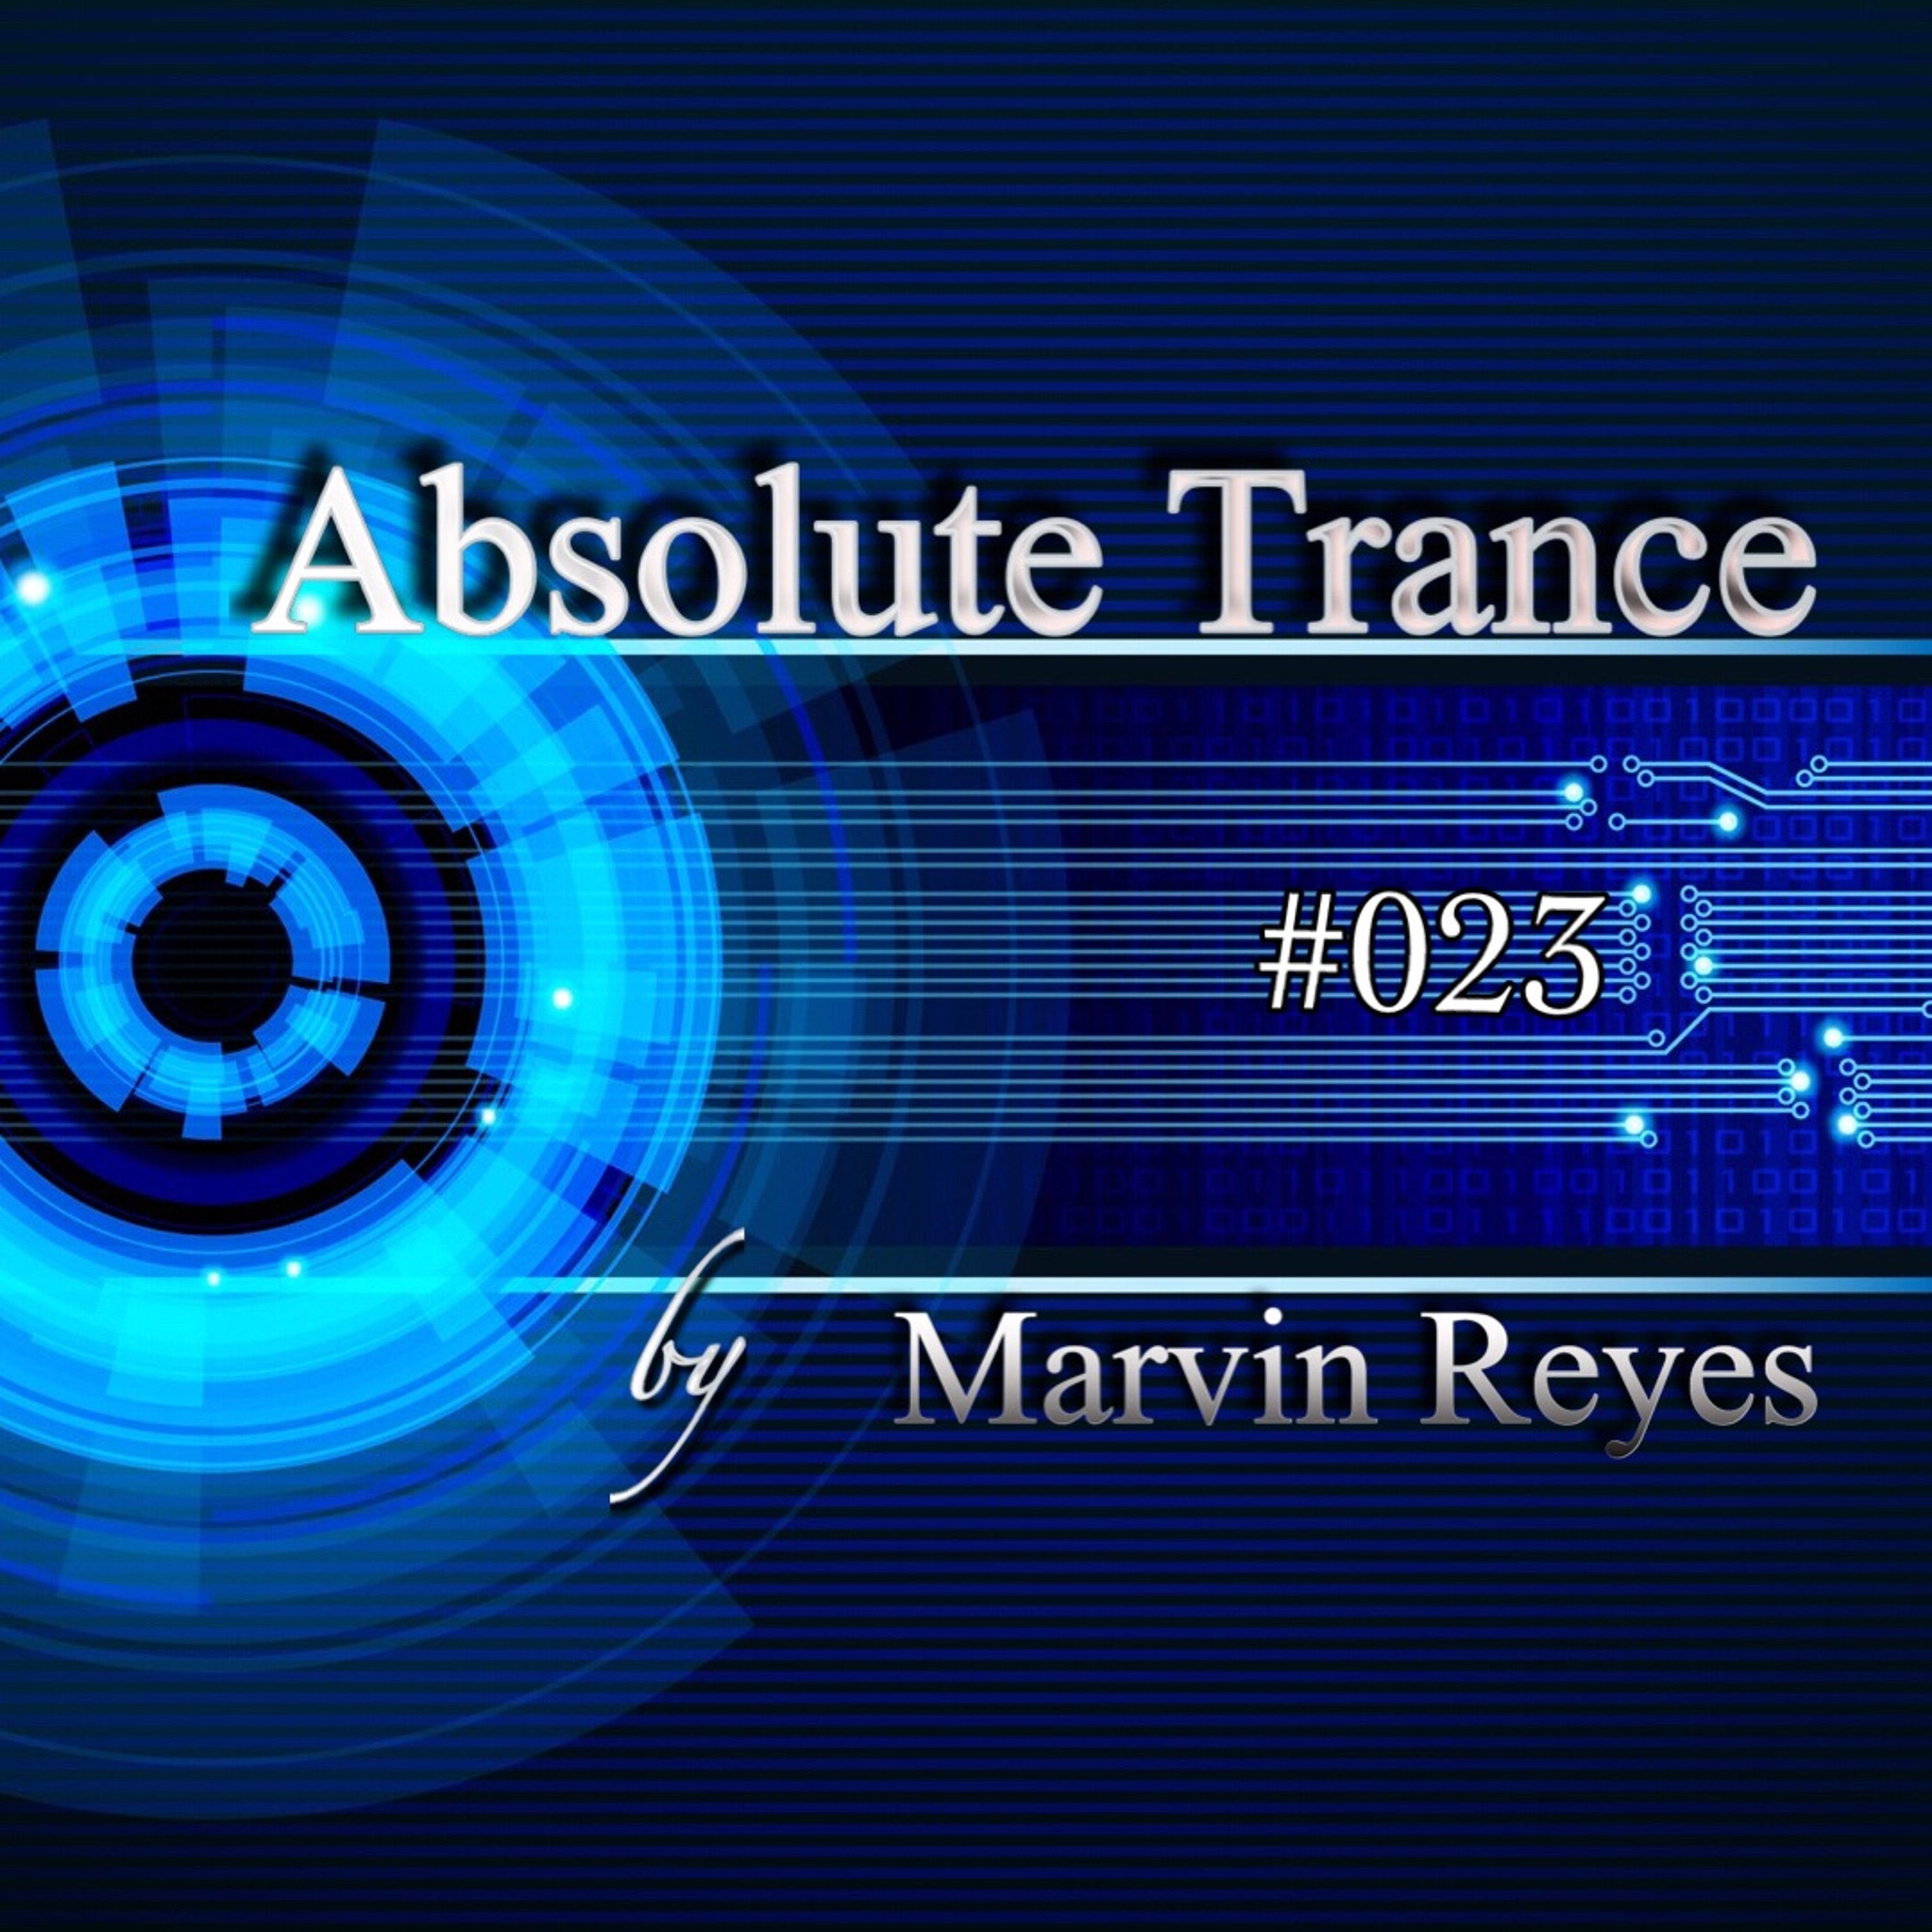 Absolute Trance #023